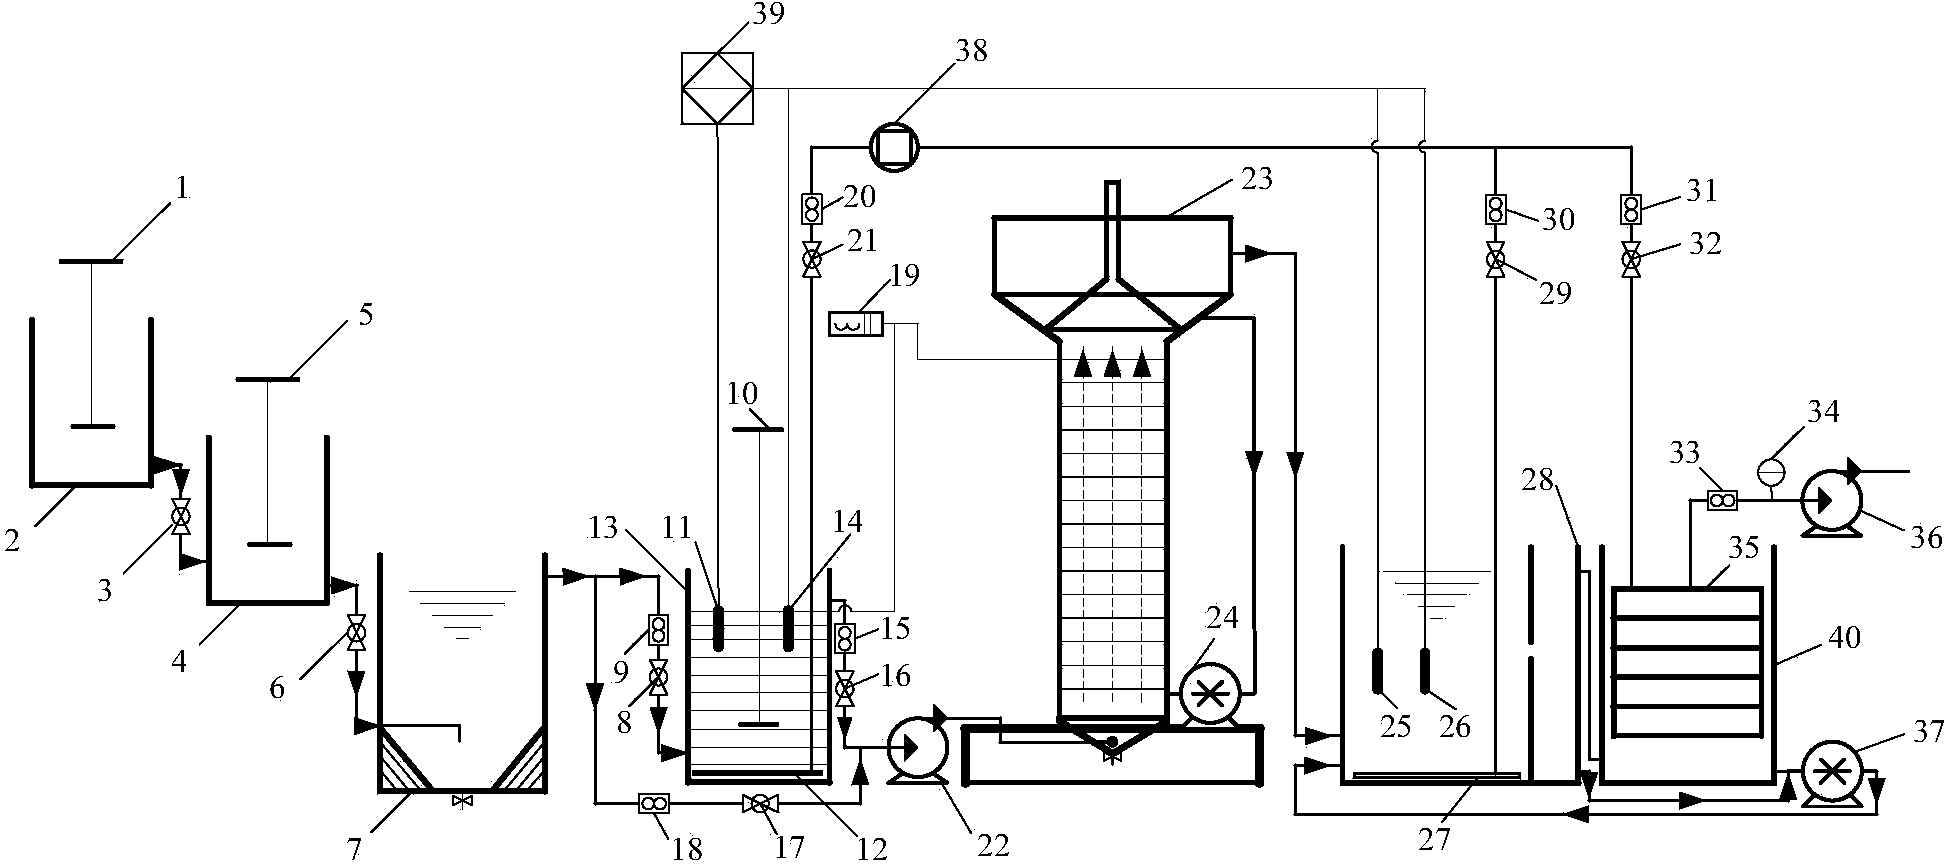 Garbage leachate treating device